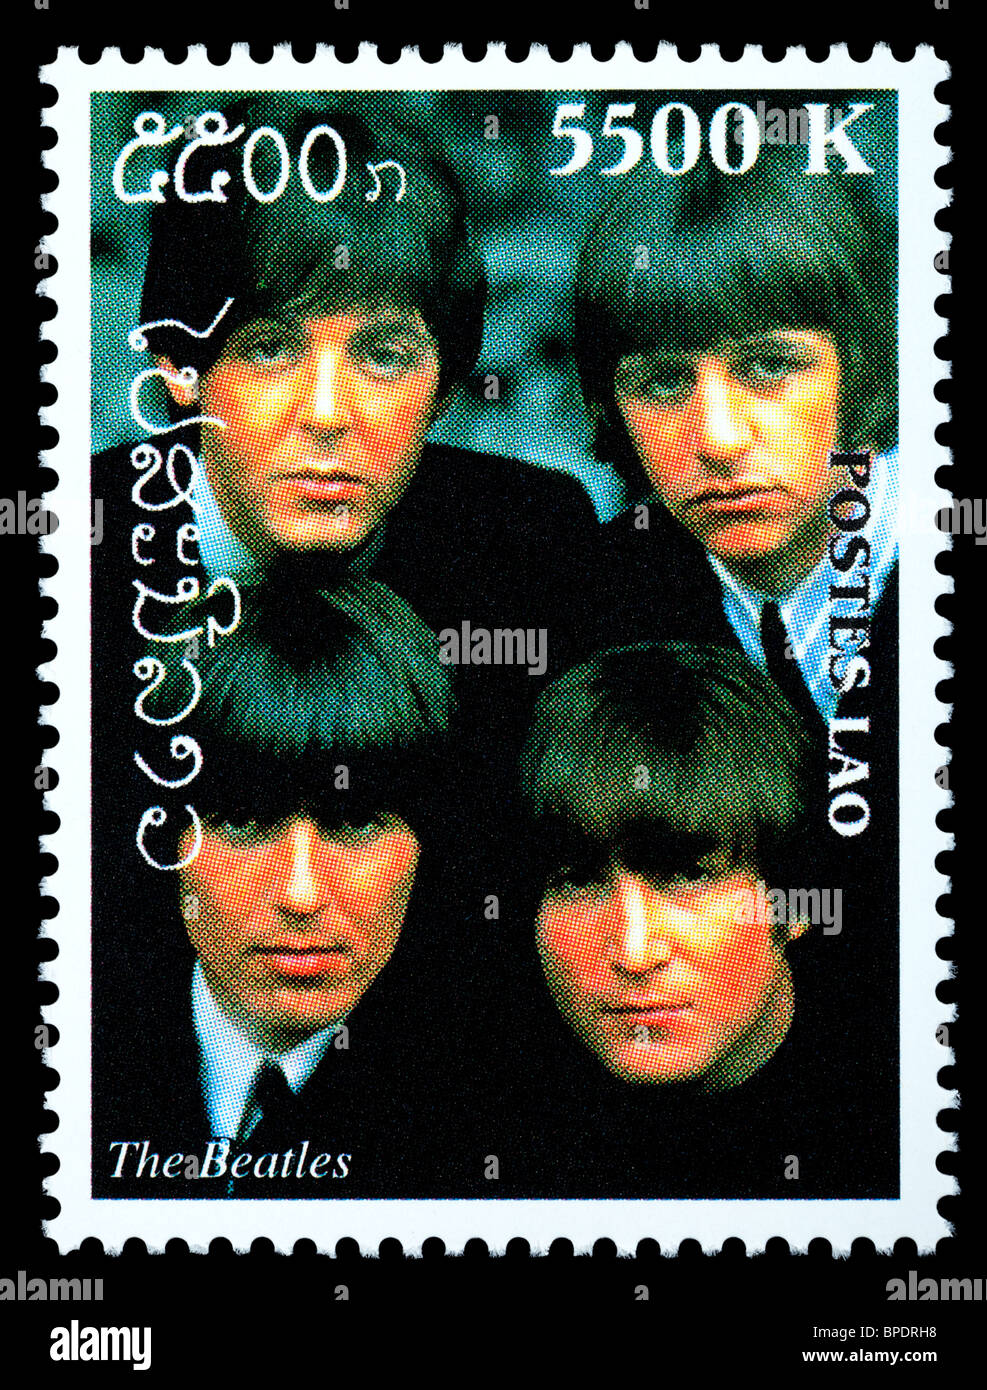 LAOS - CIRCA 2000: A postage stamp printed in Laos showing The Beatles; circa 2000 Stock Photo